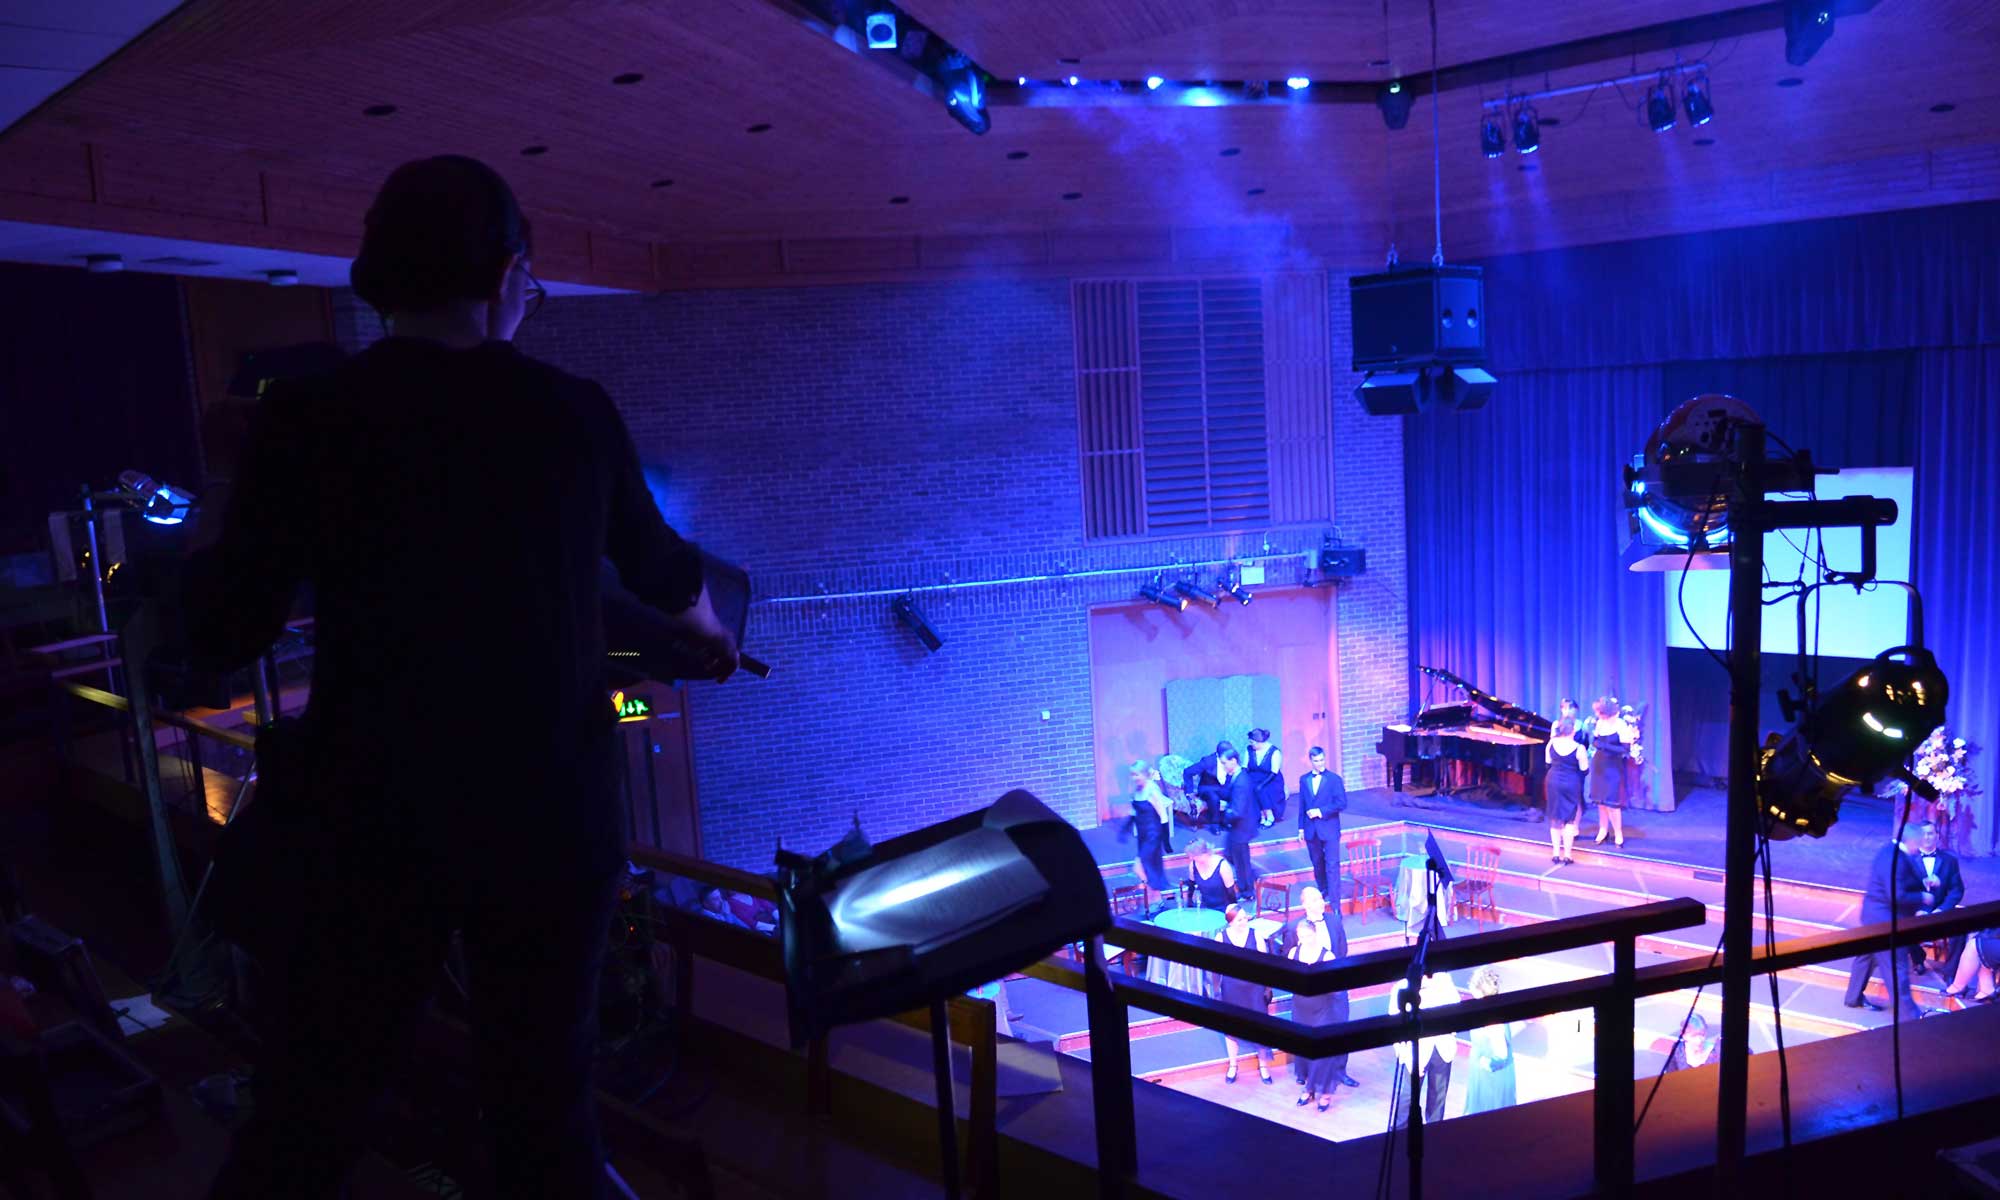 Lighting and sound from the gallery of Leighton Park School Theatre